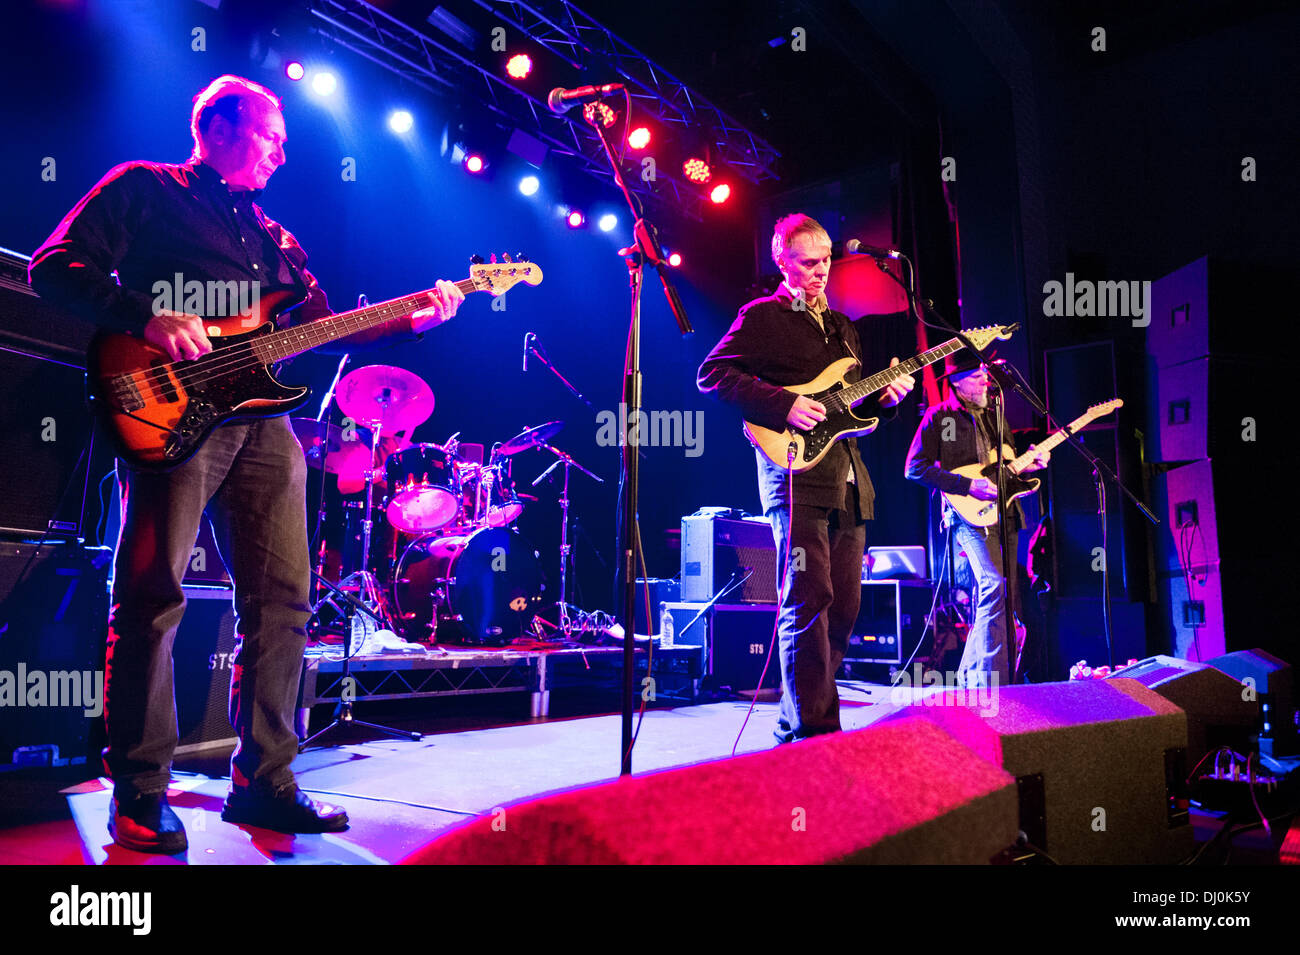 Manchester, UK. 17th November 2013. US rock band Television in concert at Manchester Academy. Fred Smith (bass), Tom Verlaine and Jimmy Rip (guitars). Stock Photo